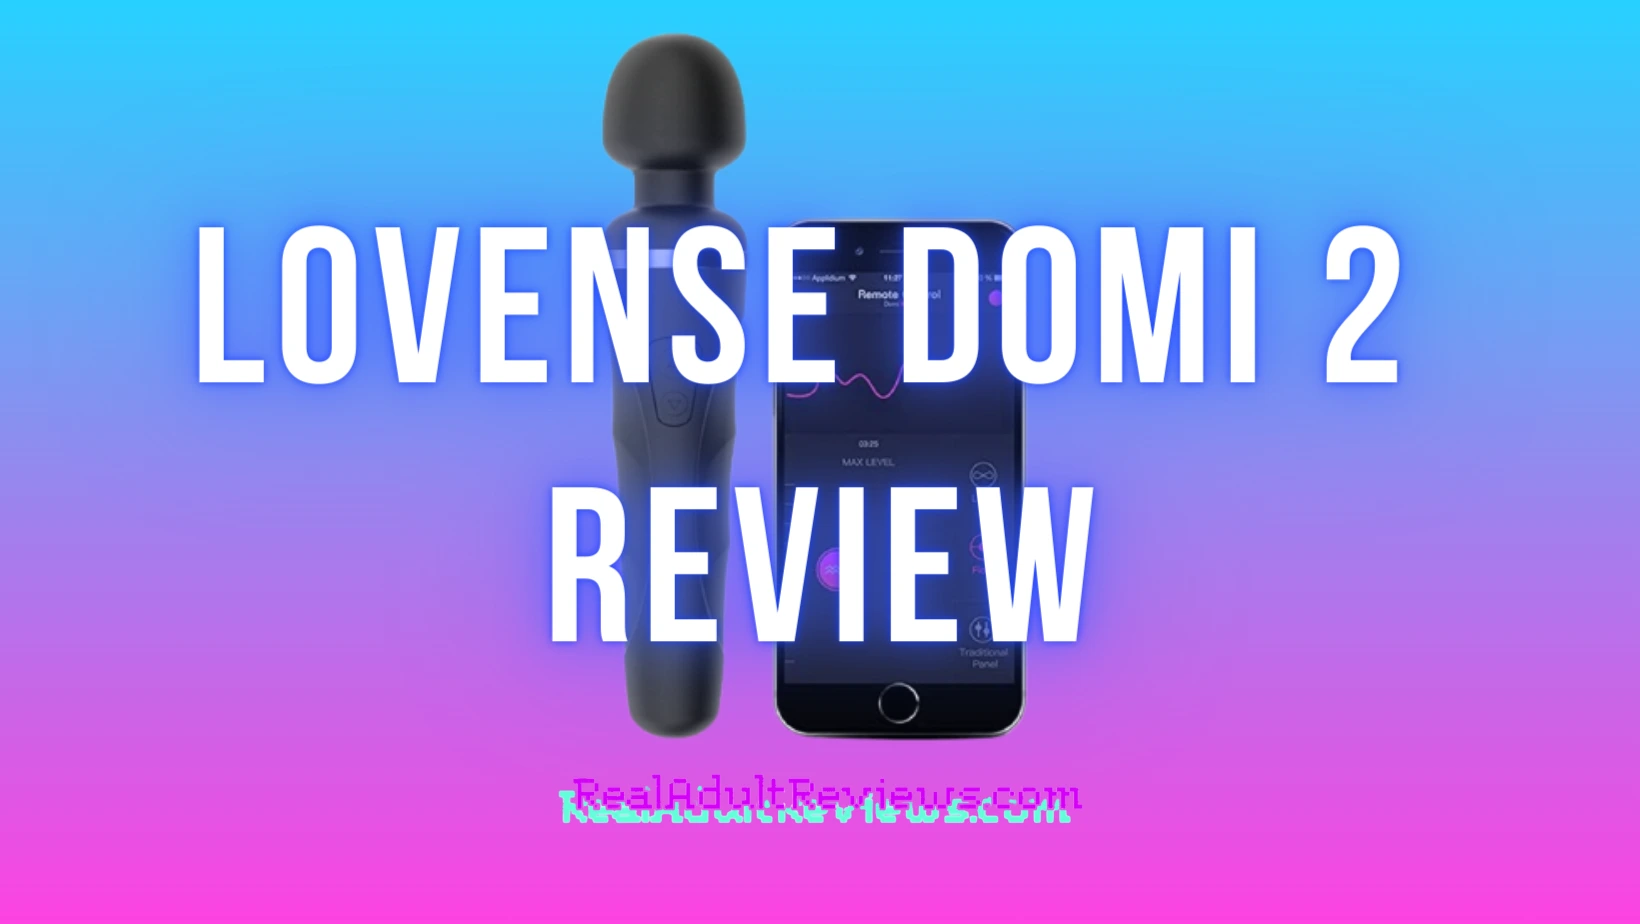 Lovense Domi 2 Vibrator Mini-Wand Review: Do You Need So Much?